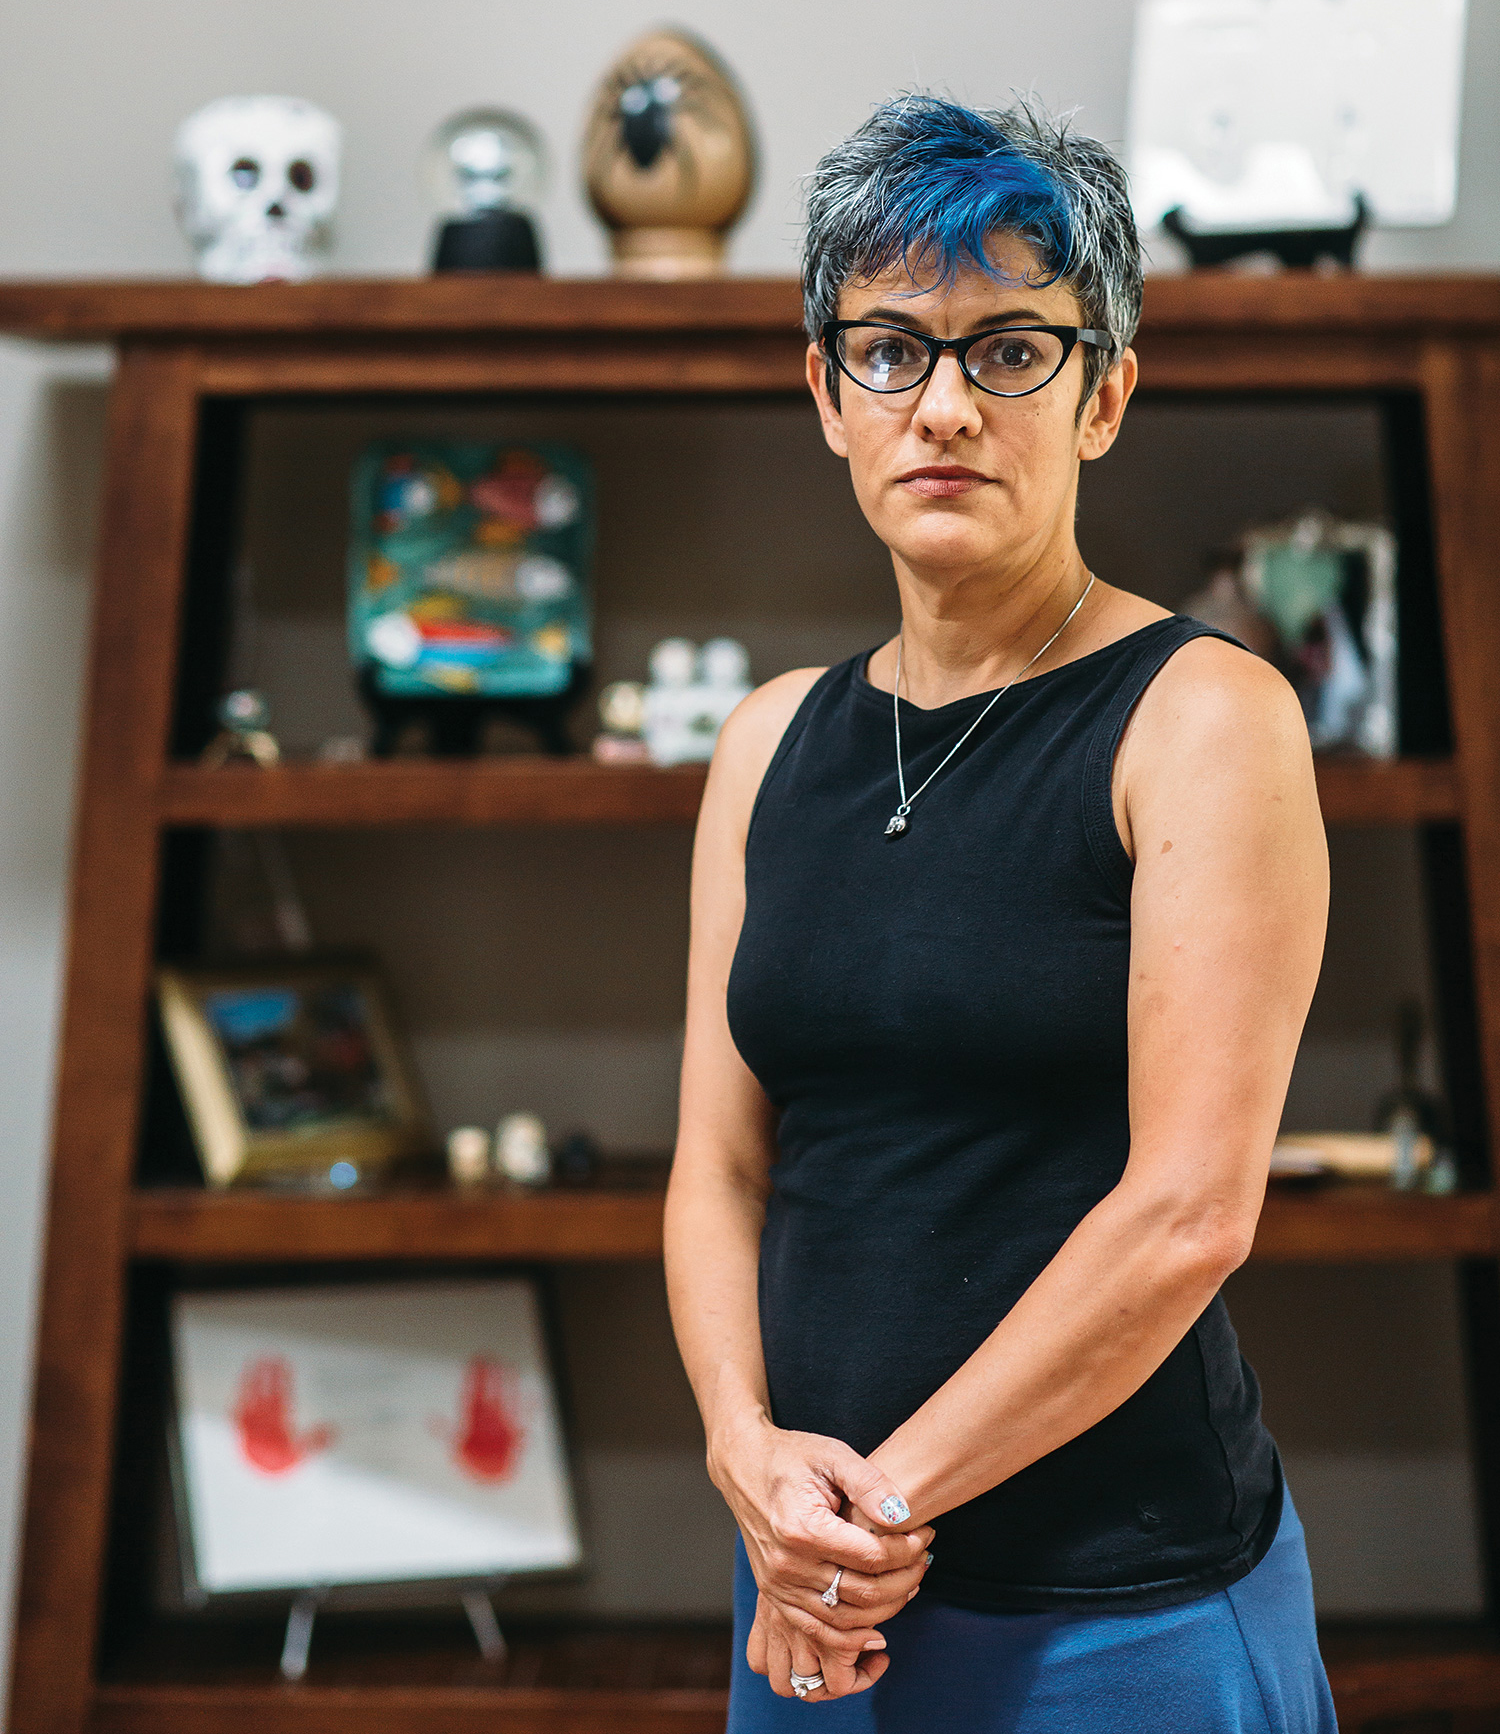 “I even had spiders on my wedding invitations,” reveals Lisa Swain of Hendersonville, who collects Day of the Dead memorabilia and other spooky accessories all year long. Photo by Tim Robison